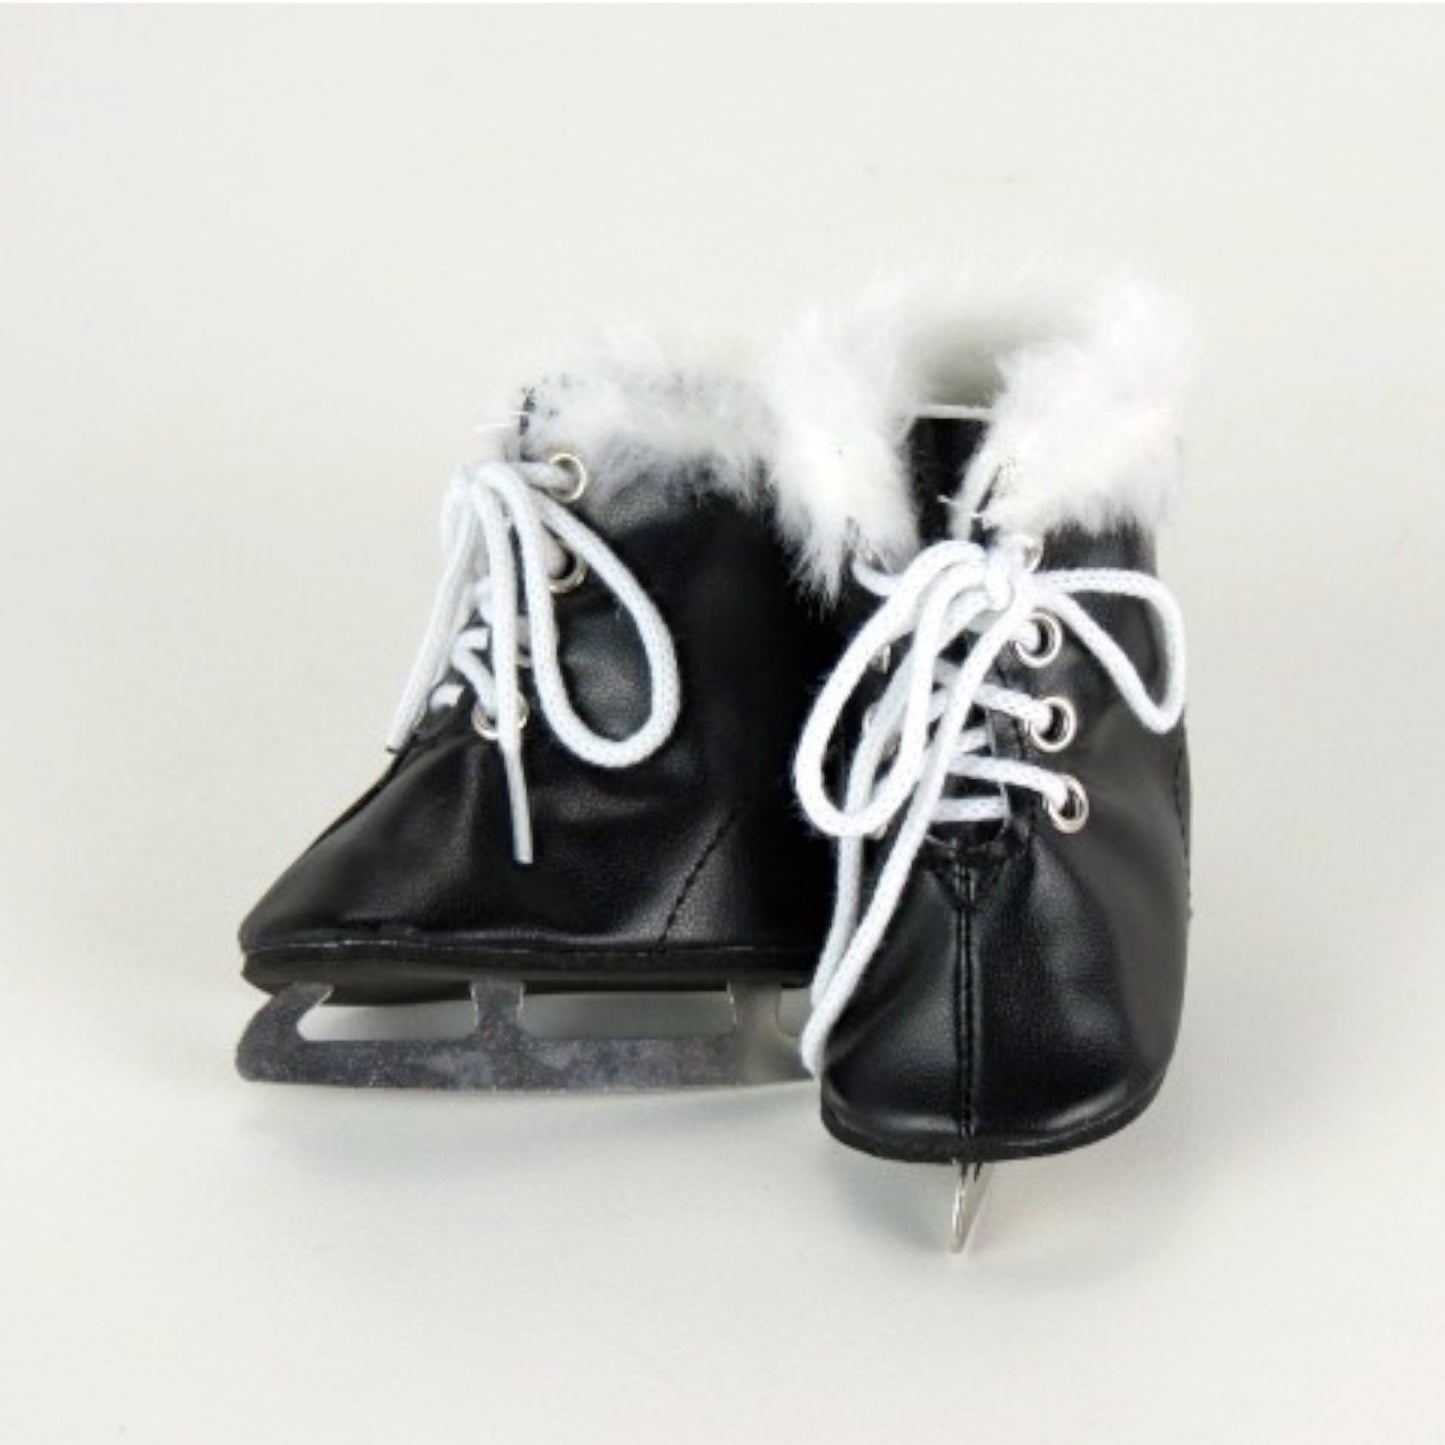 Black Ice Skates for 18-inch dolls Front and Side View